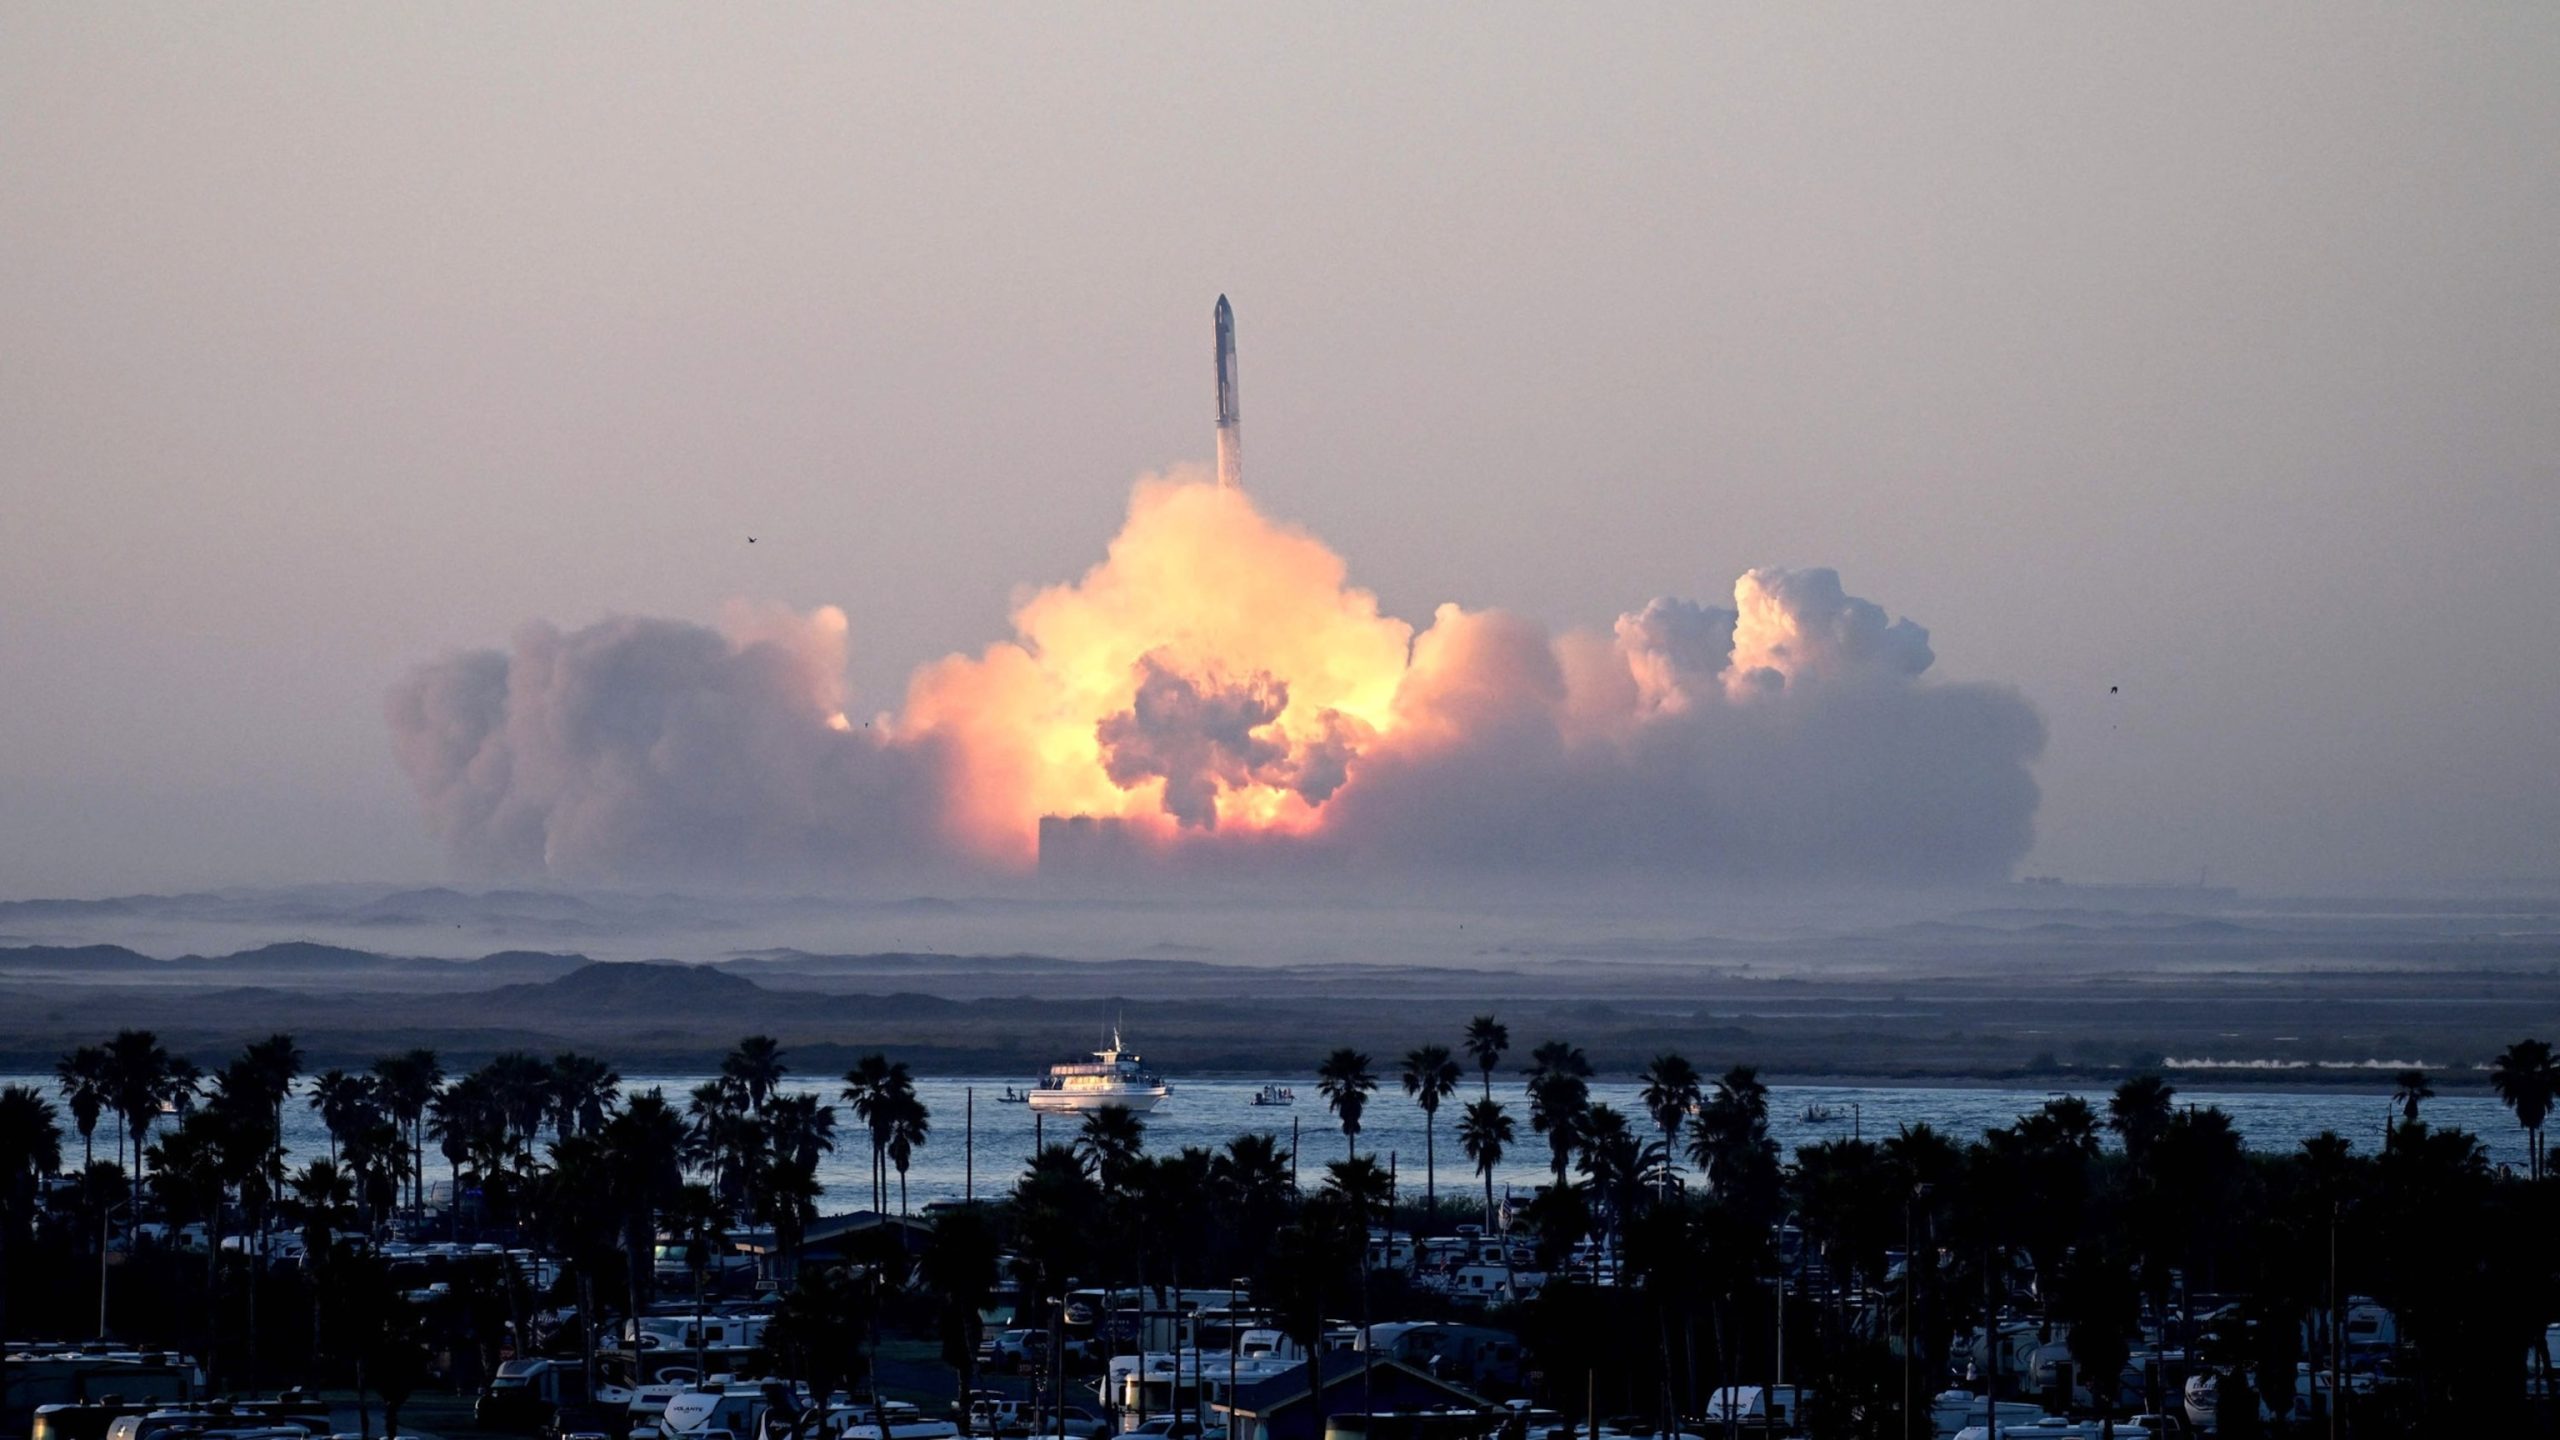 Second Test Flight of SpaceX's Starship Rocket Ends in Explosive Launch